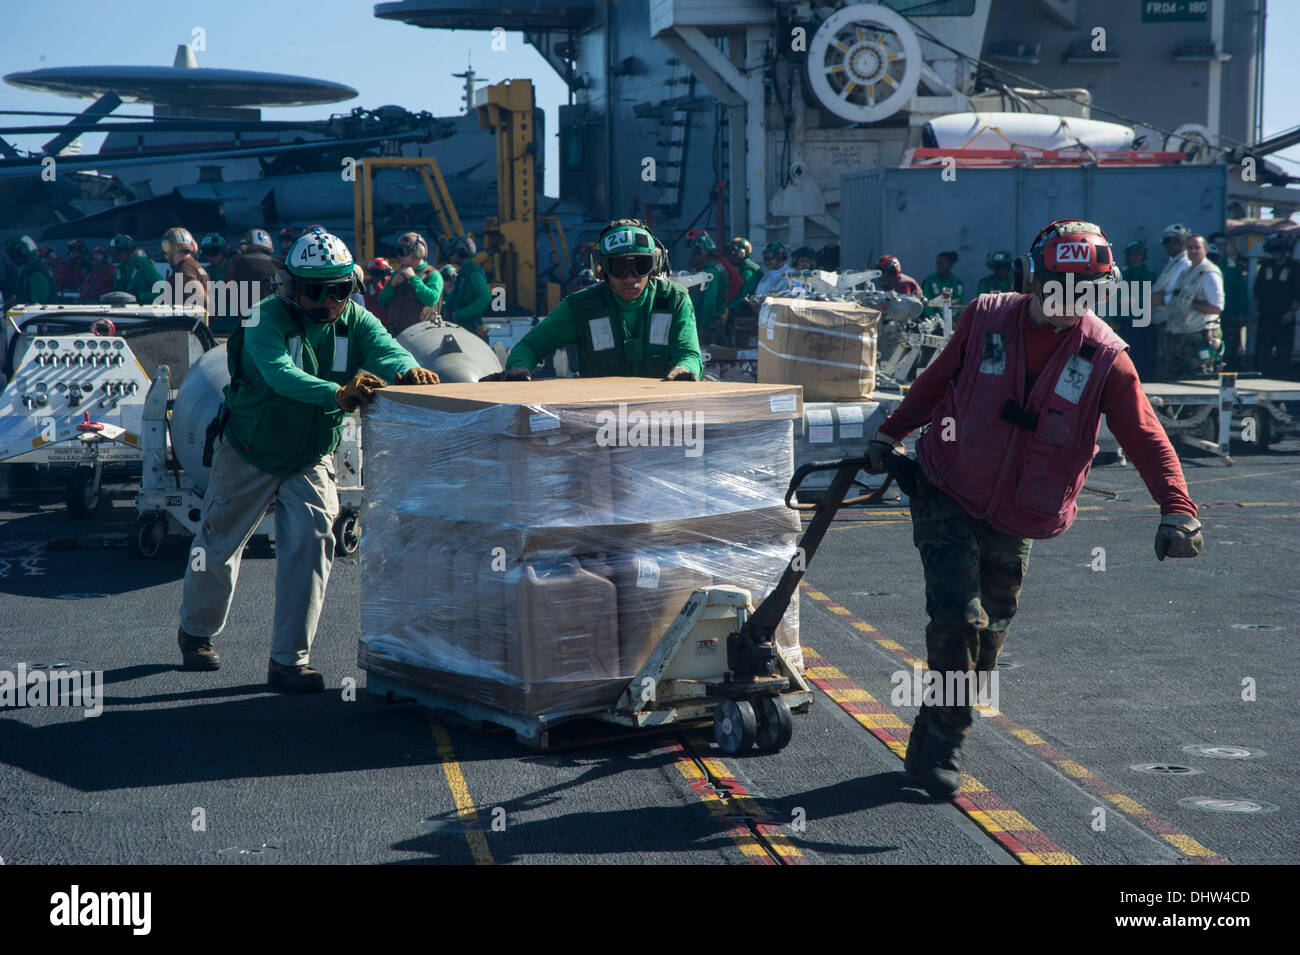 PHILIPPINE SEA (Nov. 15, 2013) Sailors aboard the U.S. Navy's forward deployed aircraft carrier USS George Washington (CVN 73) move a palate of drinking water across the flight deck in support of Operation Damayan. The George Washington Strike Group supports the 3rd Marine Expeditionary Brigade to assist the Philippine government in response to the aftermath of the Super typhoon Haiyan/Yolanda in the Republic of the Philippines. (U.S. Navy photo) Credit:  Foto 23/Alamy Live News Stock Photo